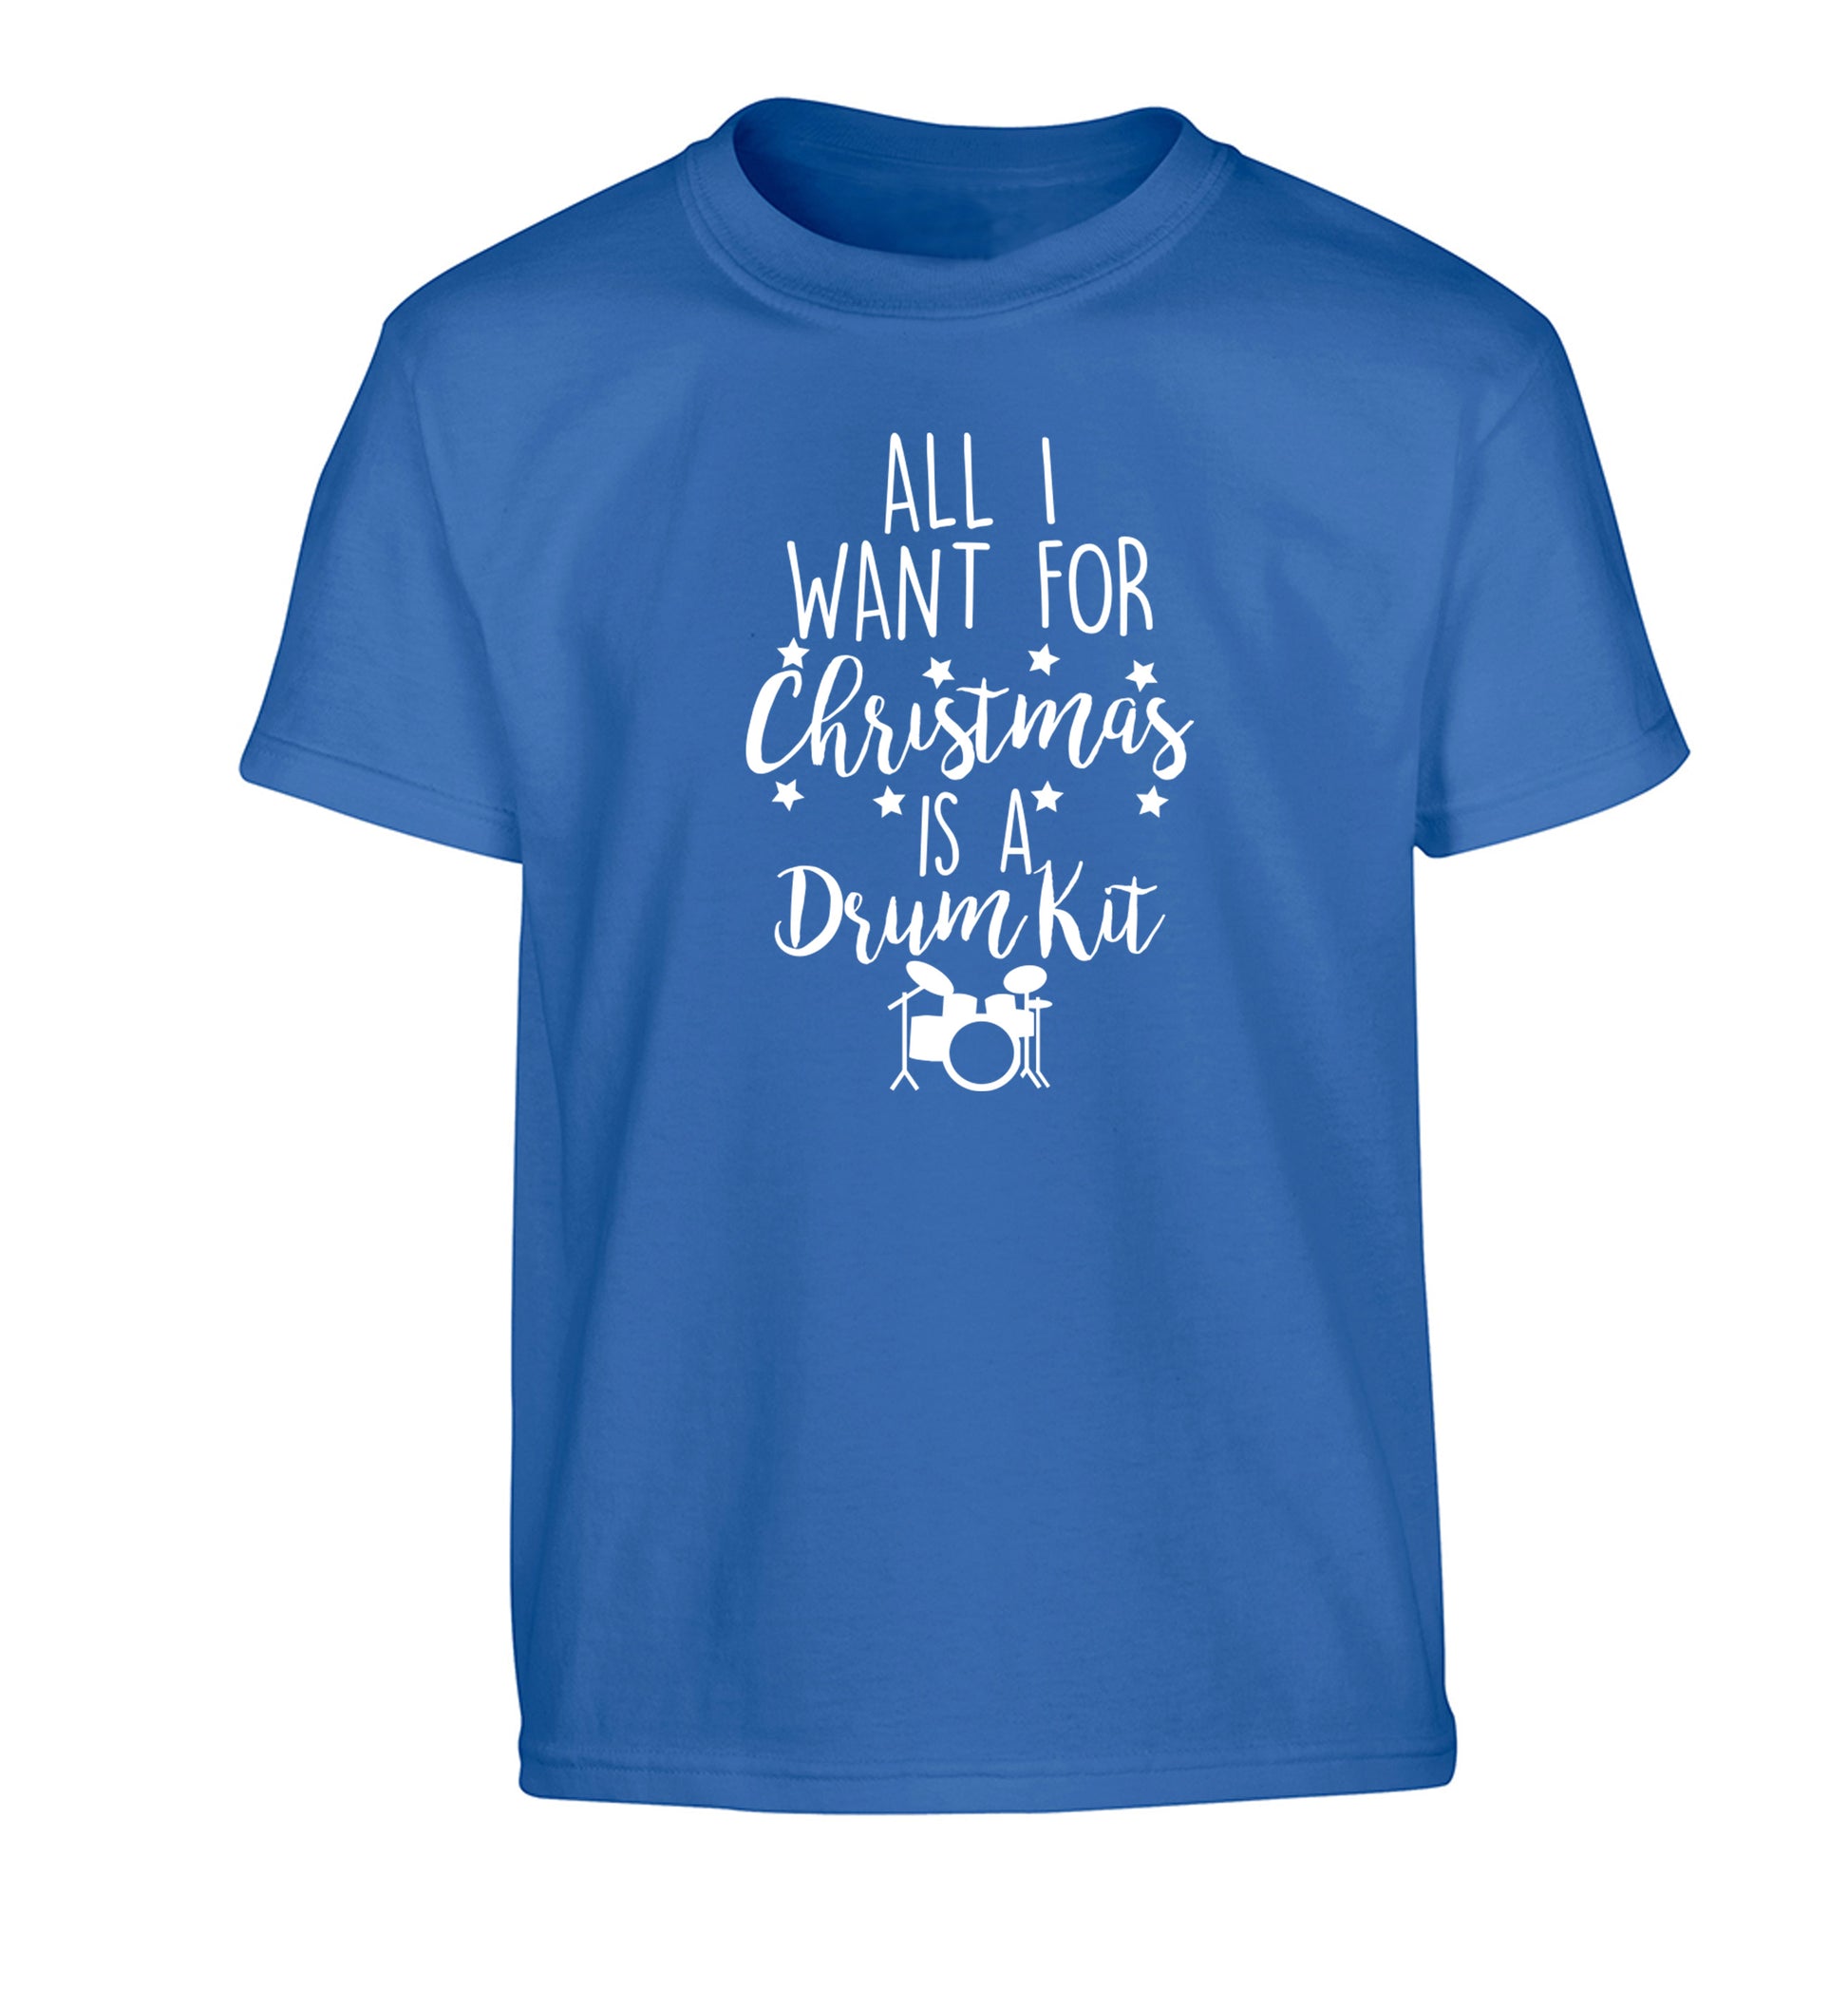 All I want for Christmas is a drum kit! Children's blue Tshirt 12-14 Years